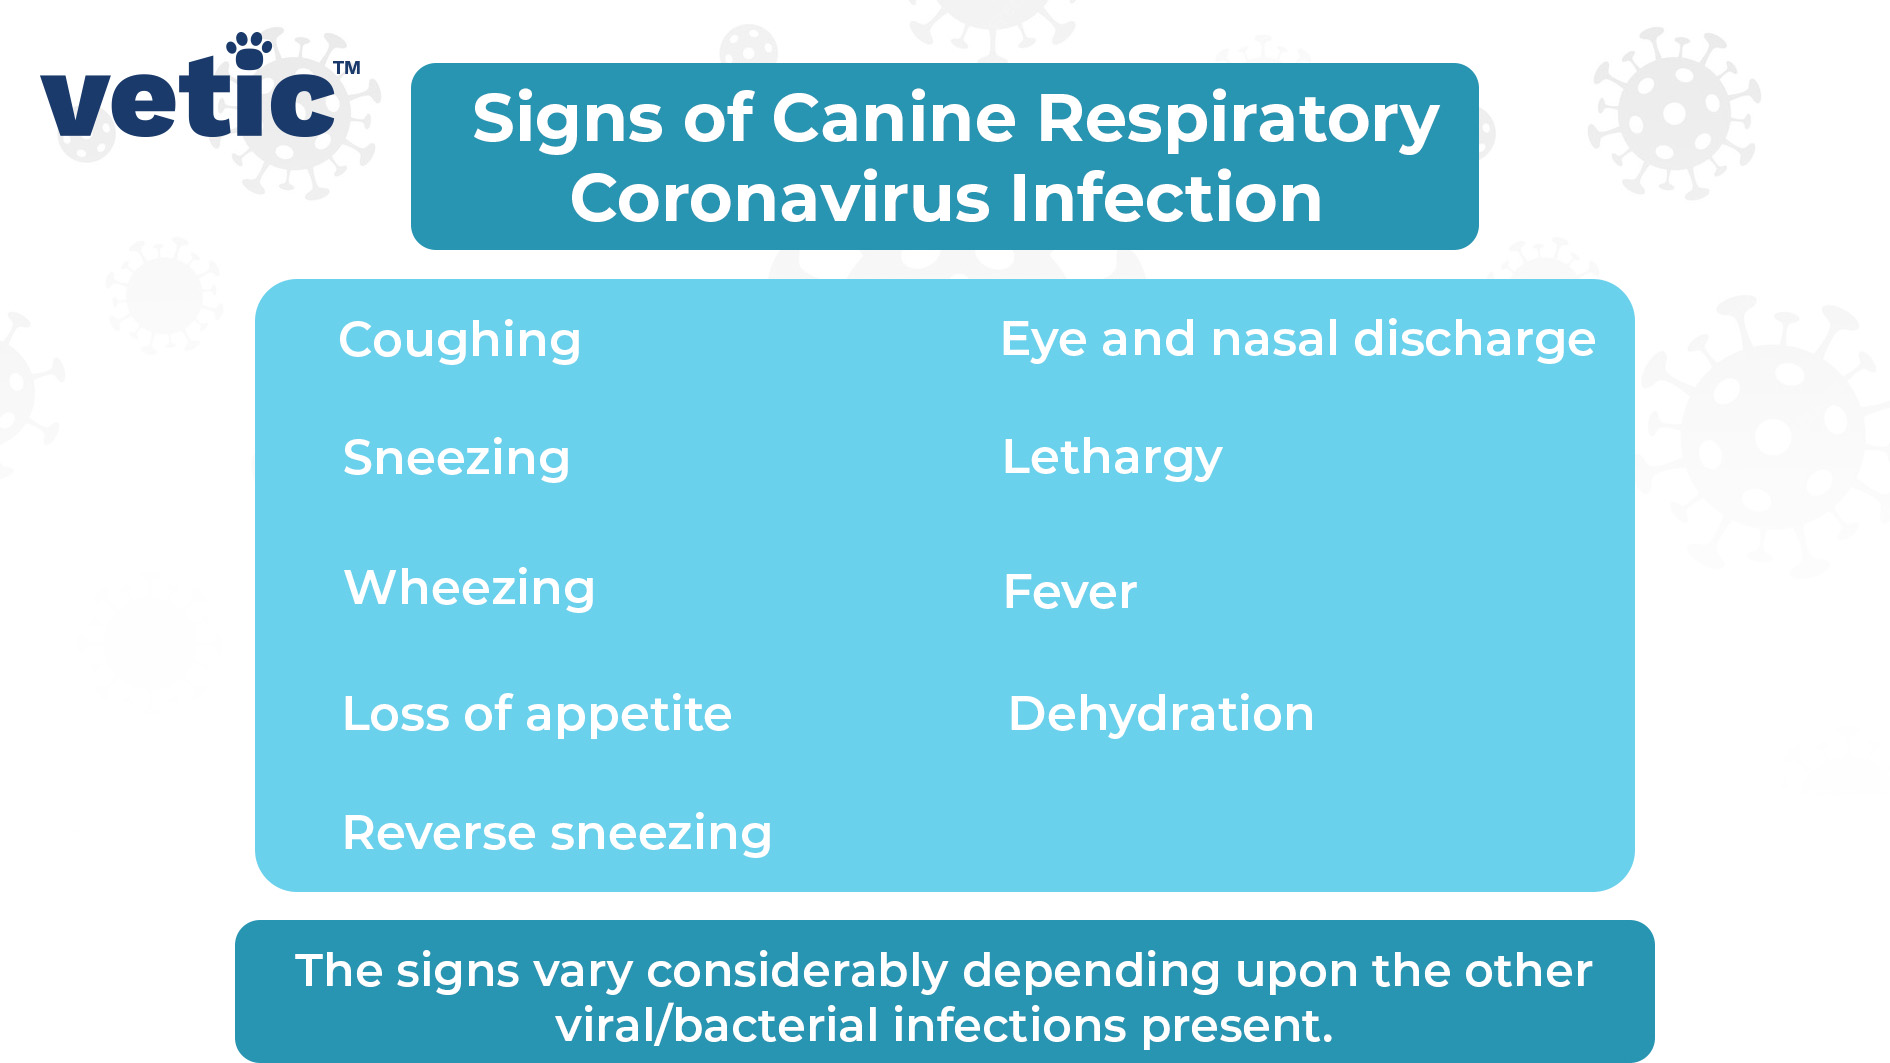 The common signs of respiratory canine coronavirus include - Coughing Sneezing Wheezing Gagging or regurgitation Reverse sneezing Eye and nasal discharge Lethargy Fever Loss of appetite Dehydration